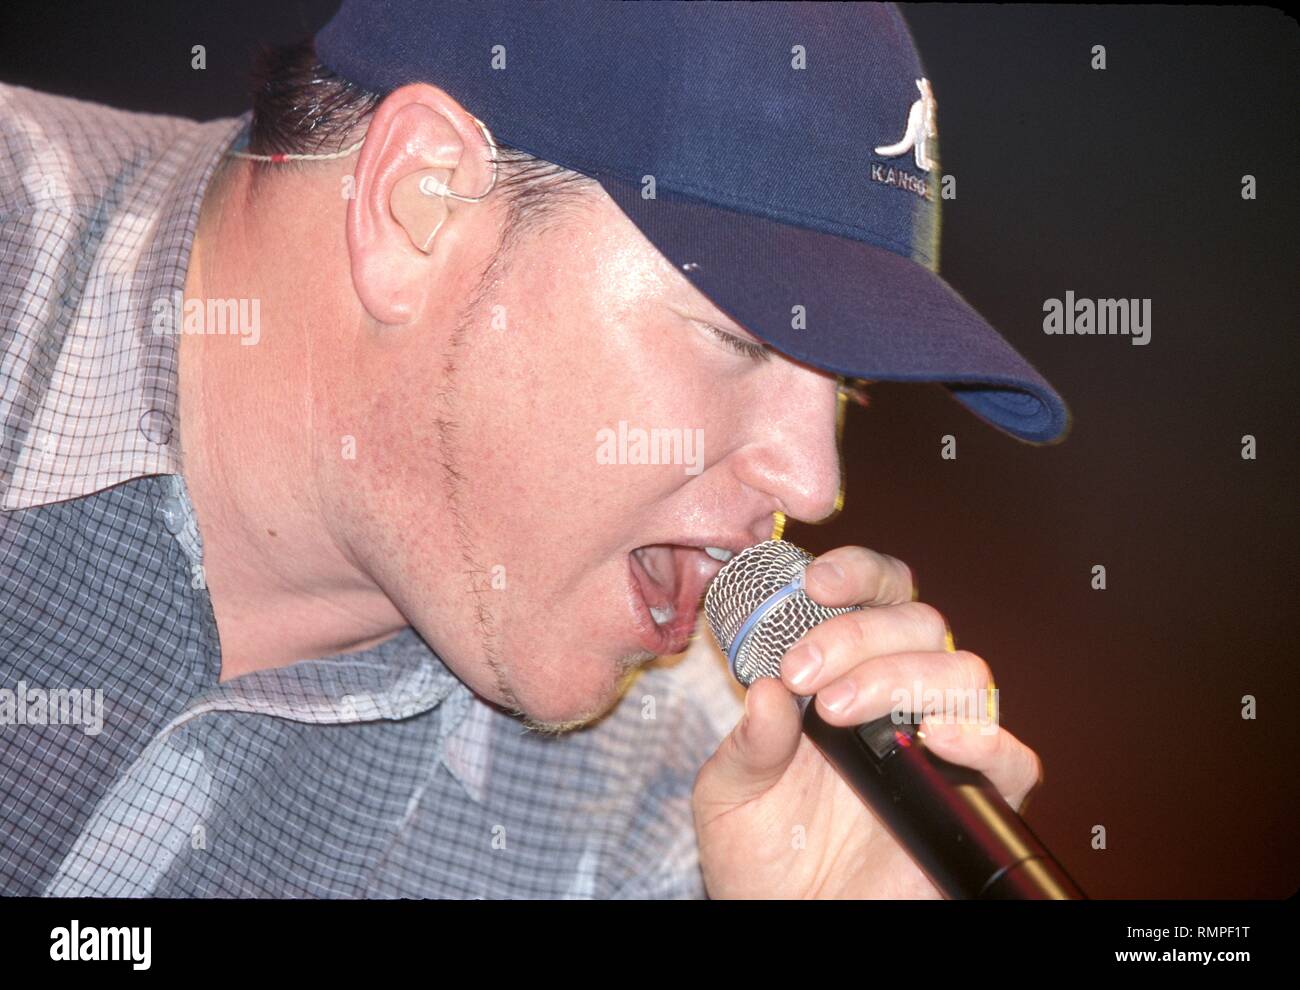 Lead singer Steve Harwell of the pop rock band Smash Mouth is shown performing on stage during a 'live' concert appearance. Stock Photo